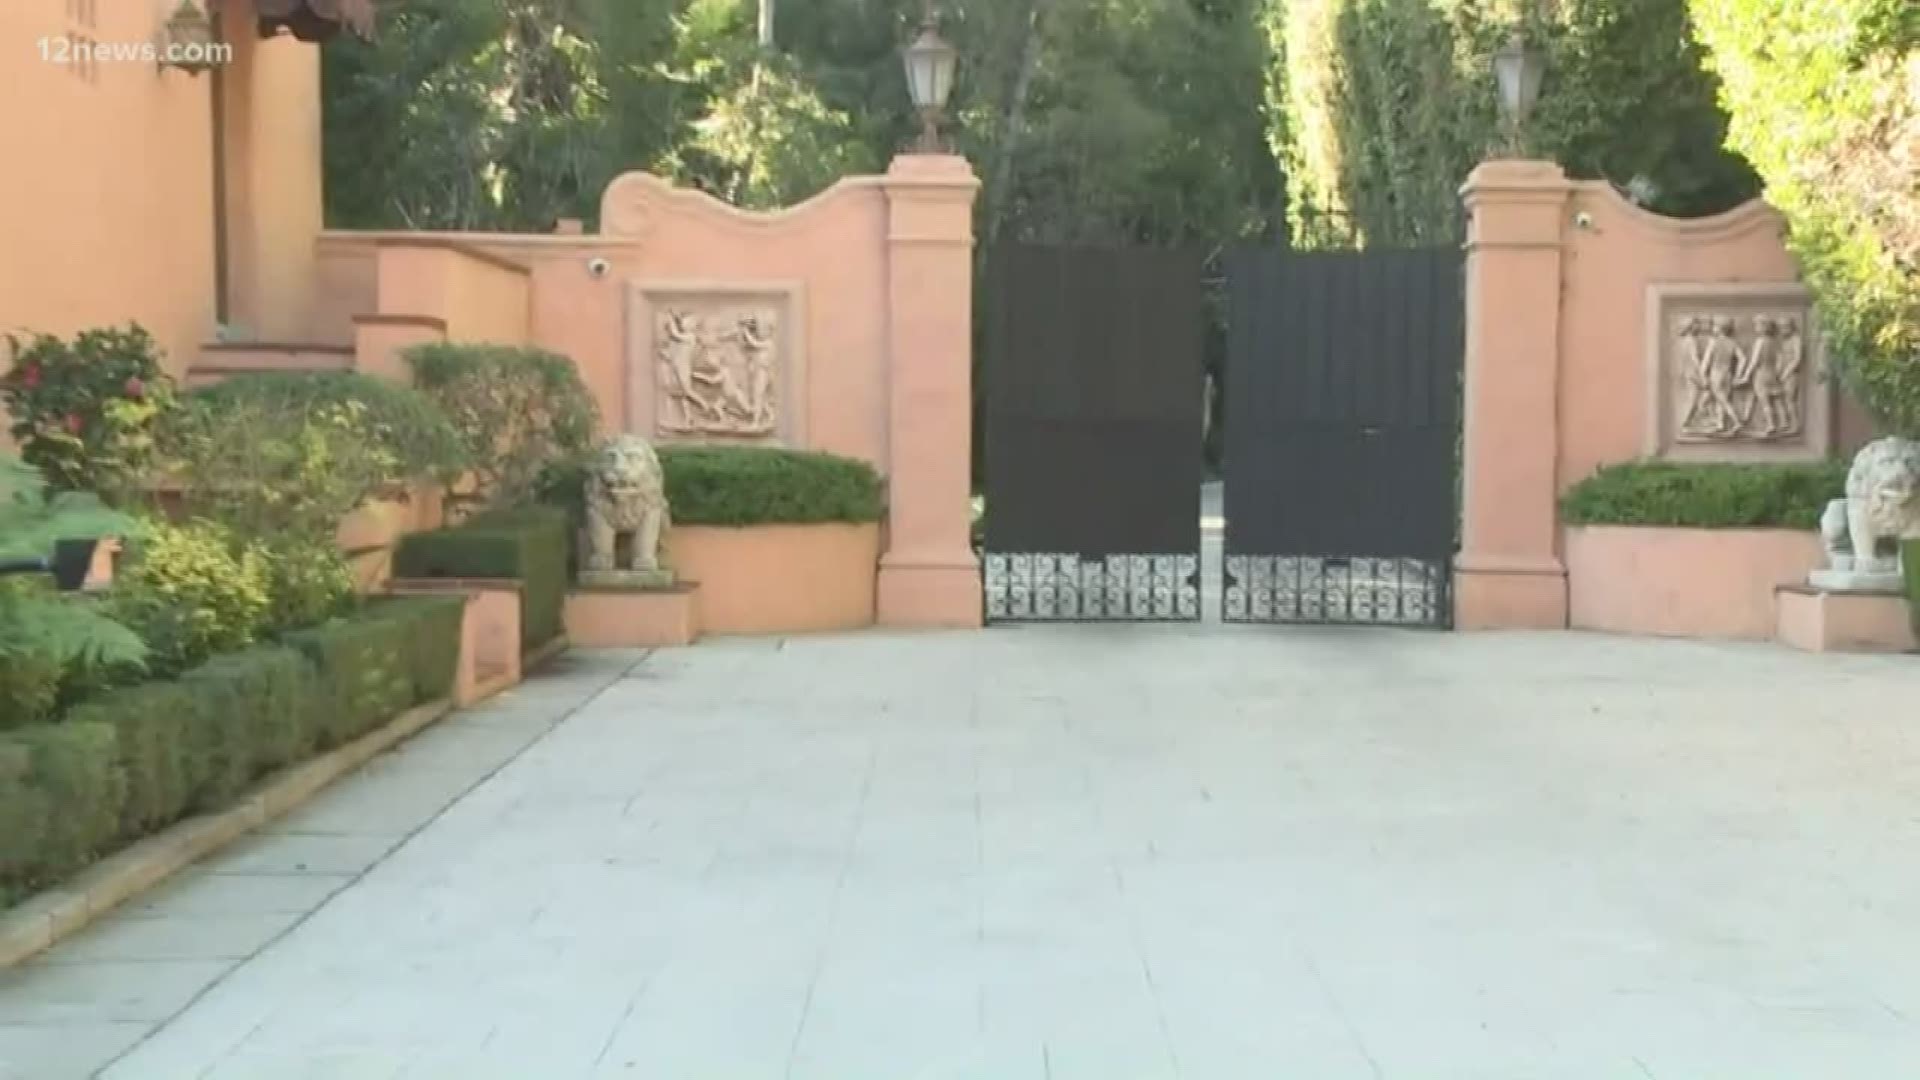 Krystle Henderson took a tour of some of the most expensive homes in the Hollywood and Beverly Hills. She tells us who are the celebrities who own the mansions.